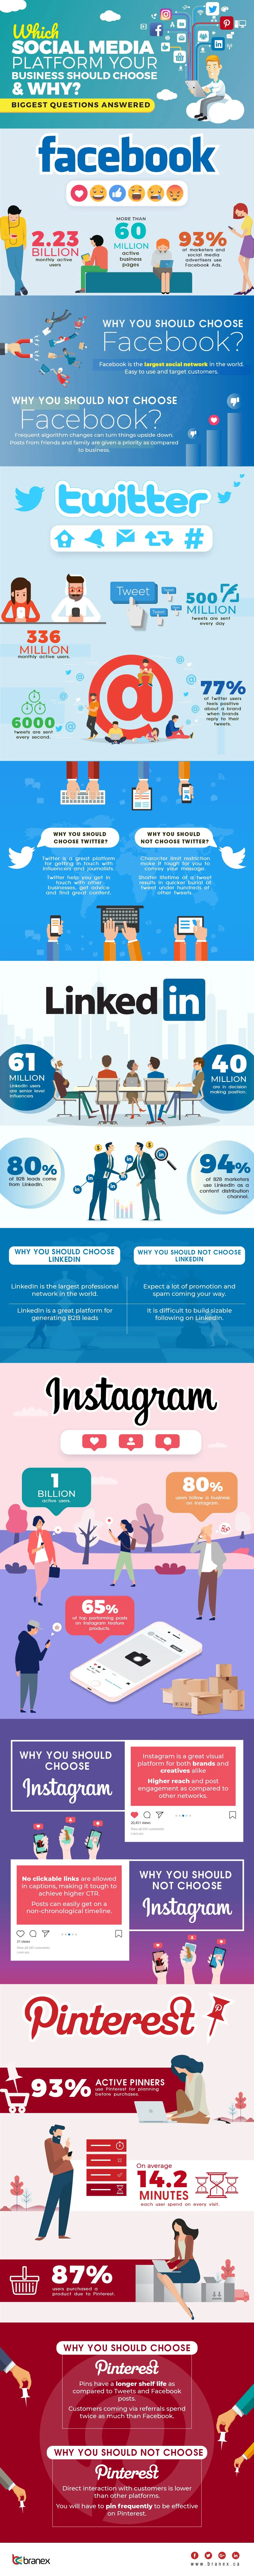 Social media and your business: Choosing the best platform - infographic, best social media platforms for business choosing the right social media platform for your business this year, how to choose the right social media platform for your business, social network for business